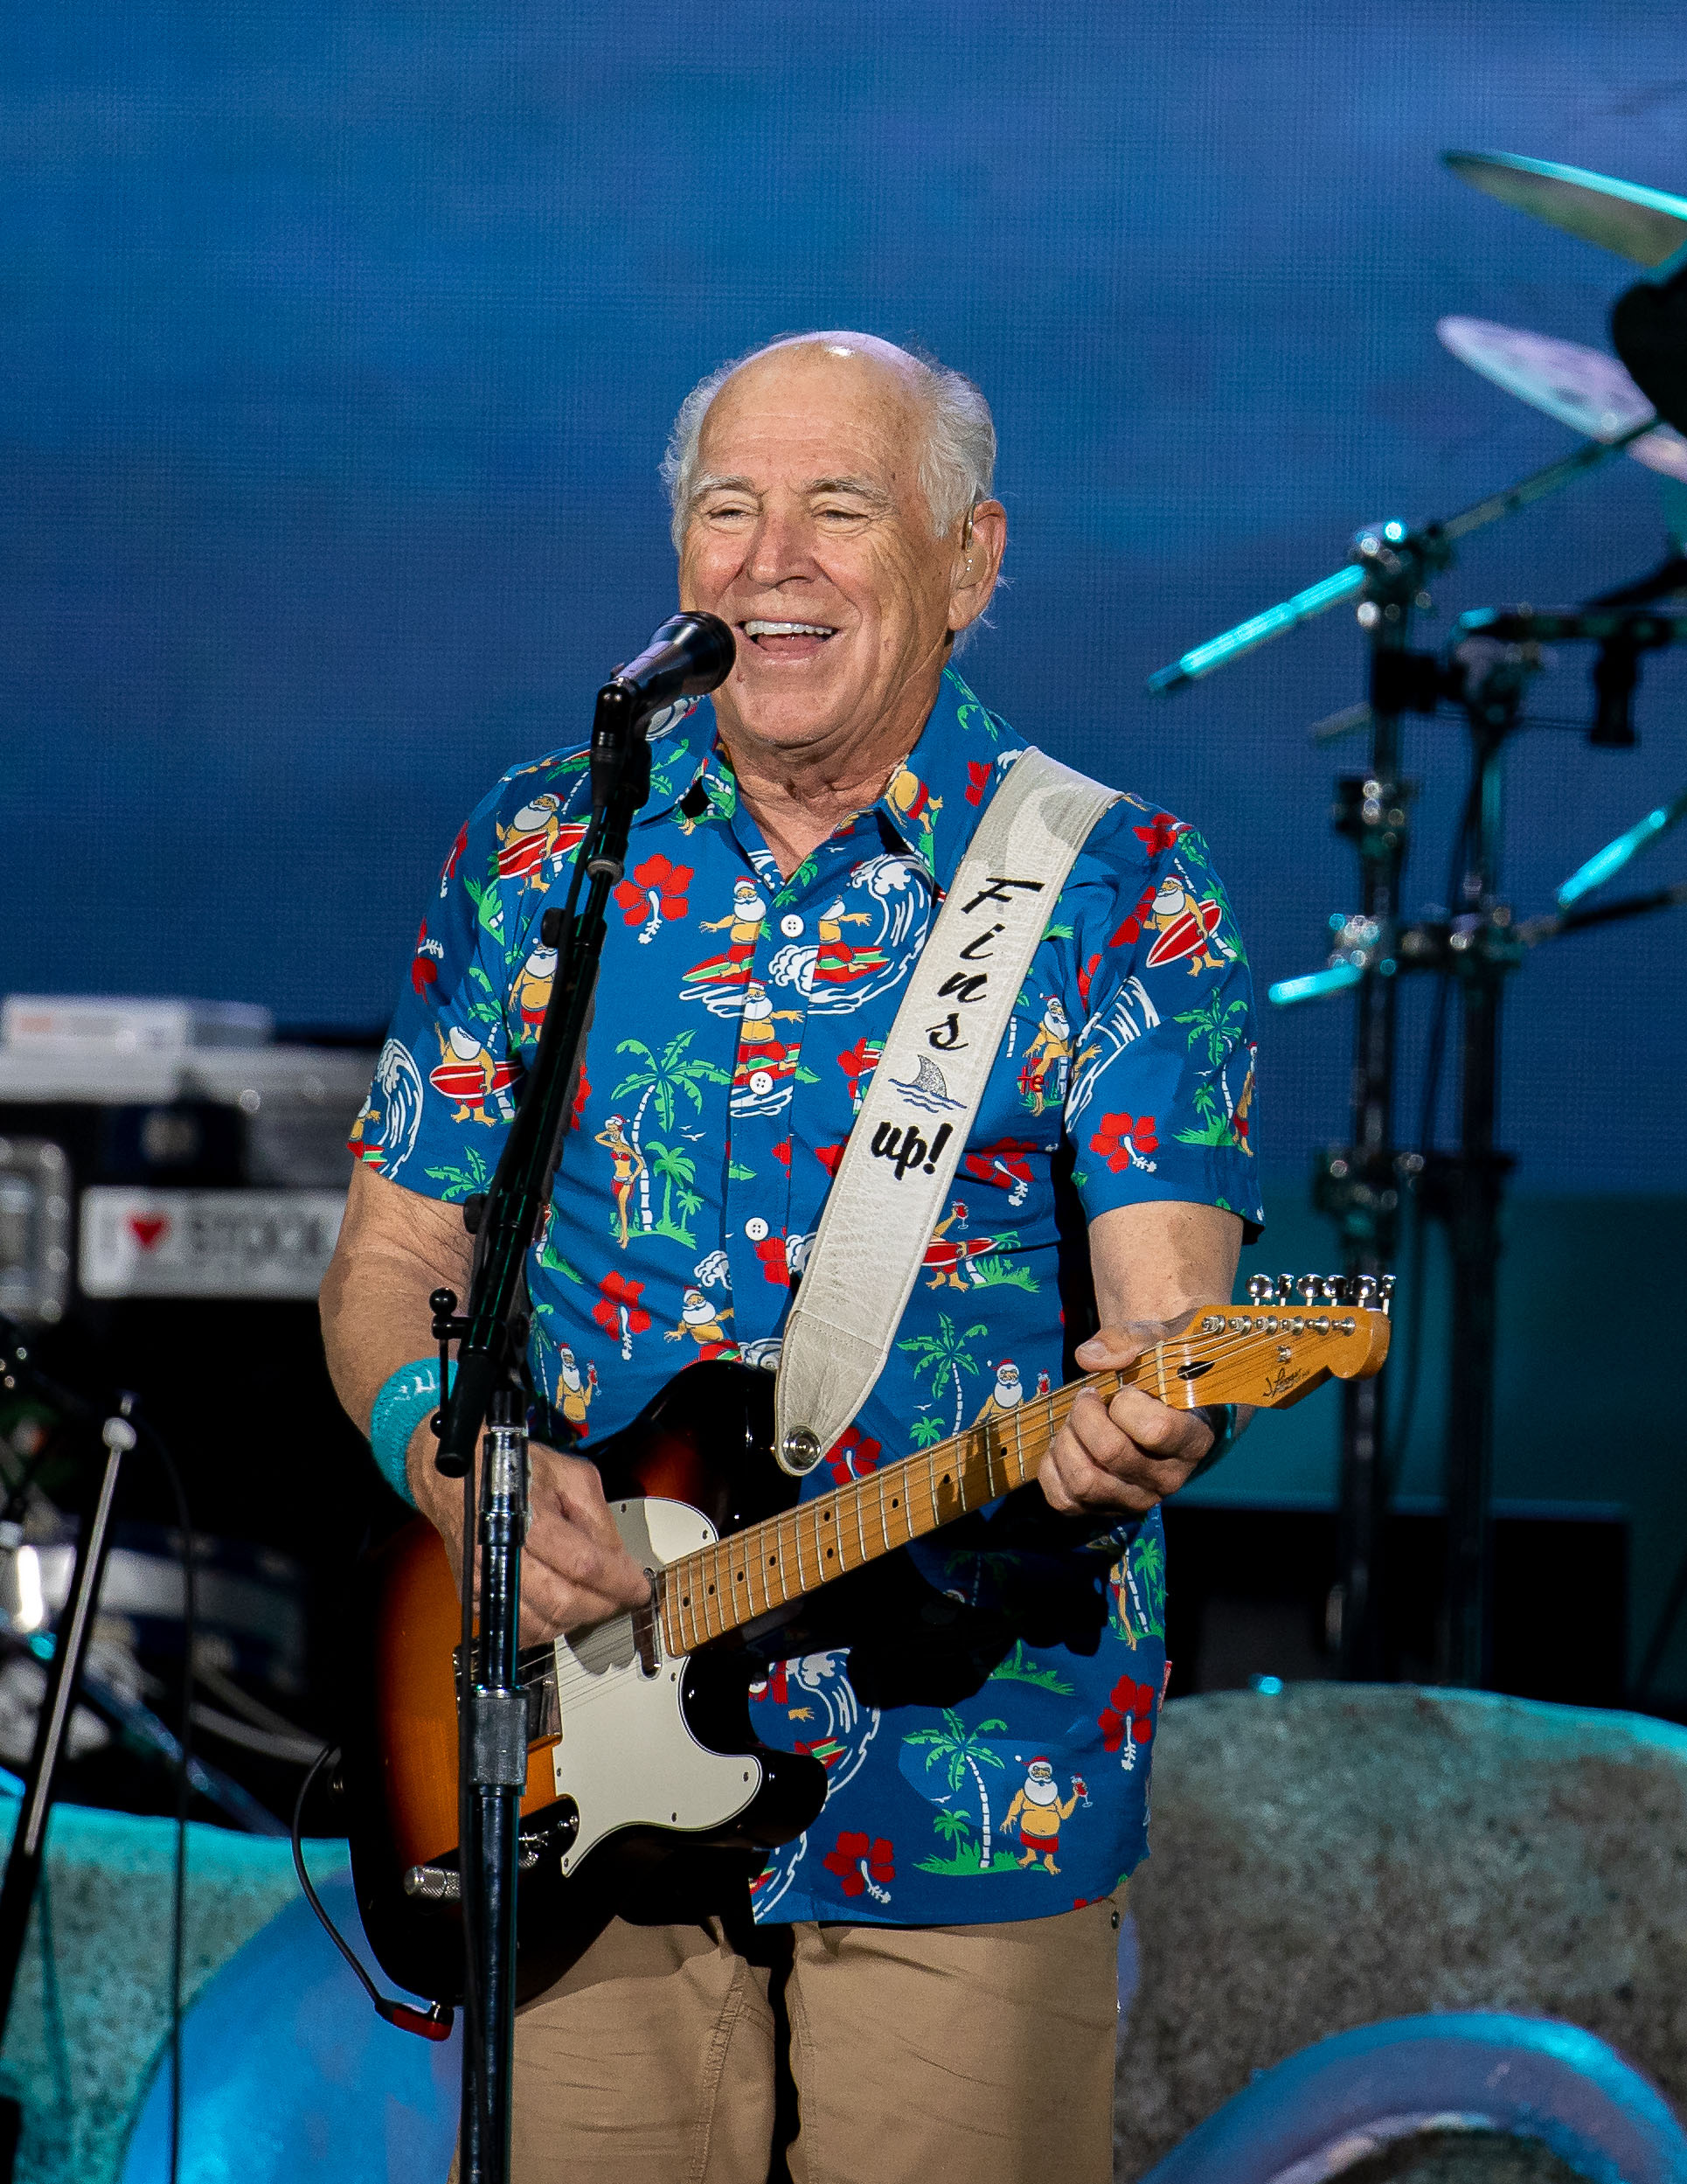 Jimmy Buffett and the Coral Reefers at iThink Financial Amp 12.9.21 with Mac McAnally ©jskolnickphotography